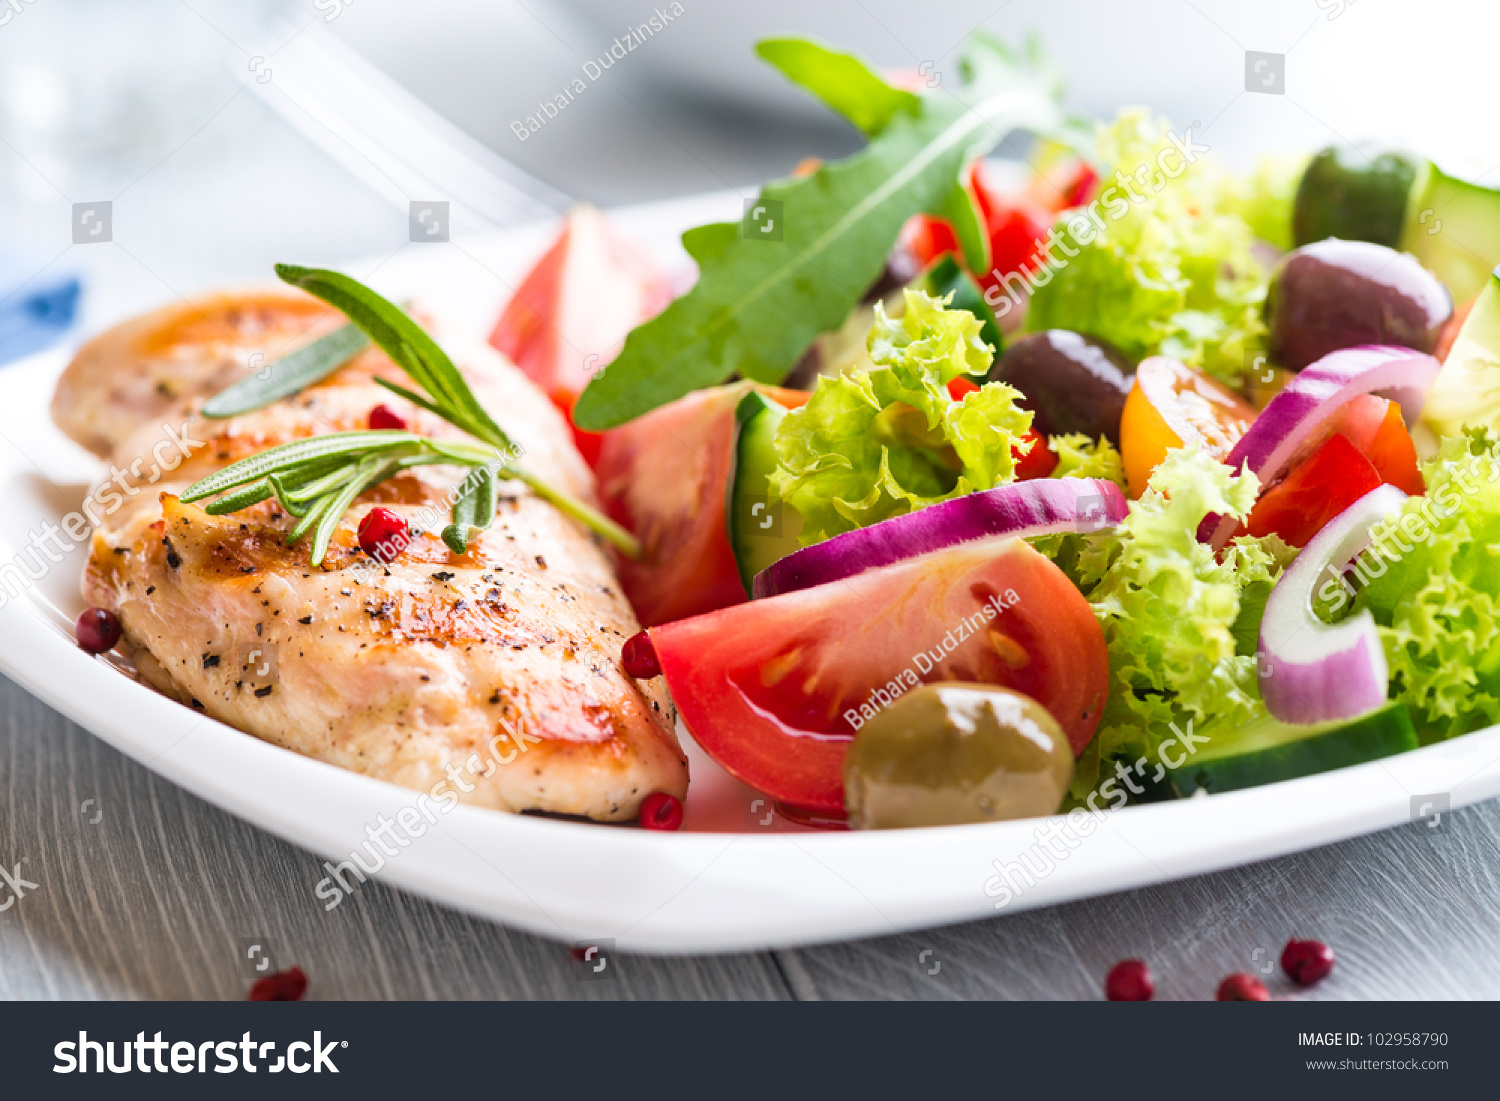 Grilled chicken breast with tomatoes, red pepper, organic green and kalamata olives, red onion, lettuce and fresh rocket and rosemary. Home made food. Concept for a tasty and healthy meal. Close up. #102958790